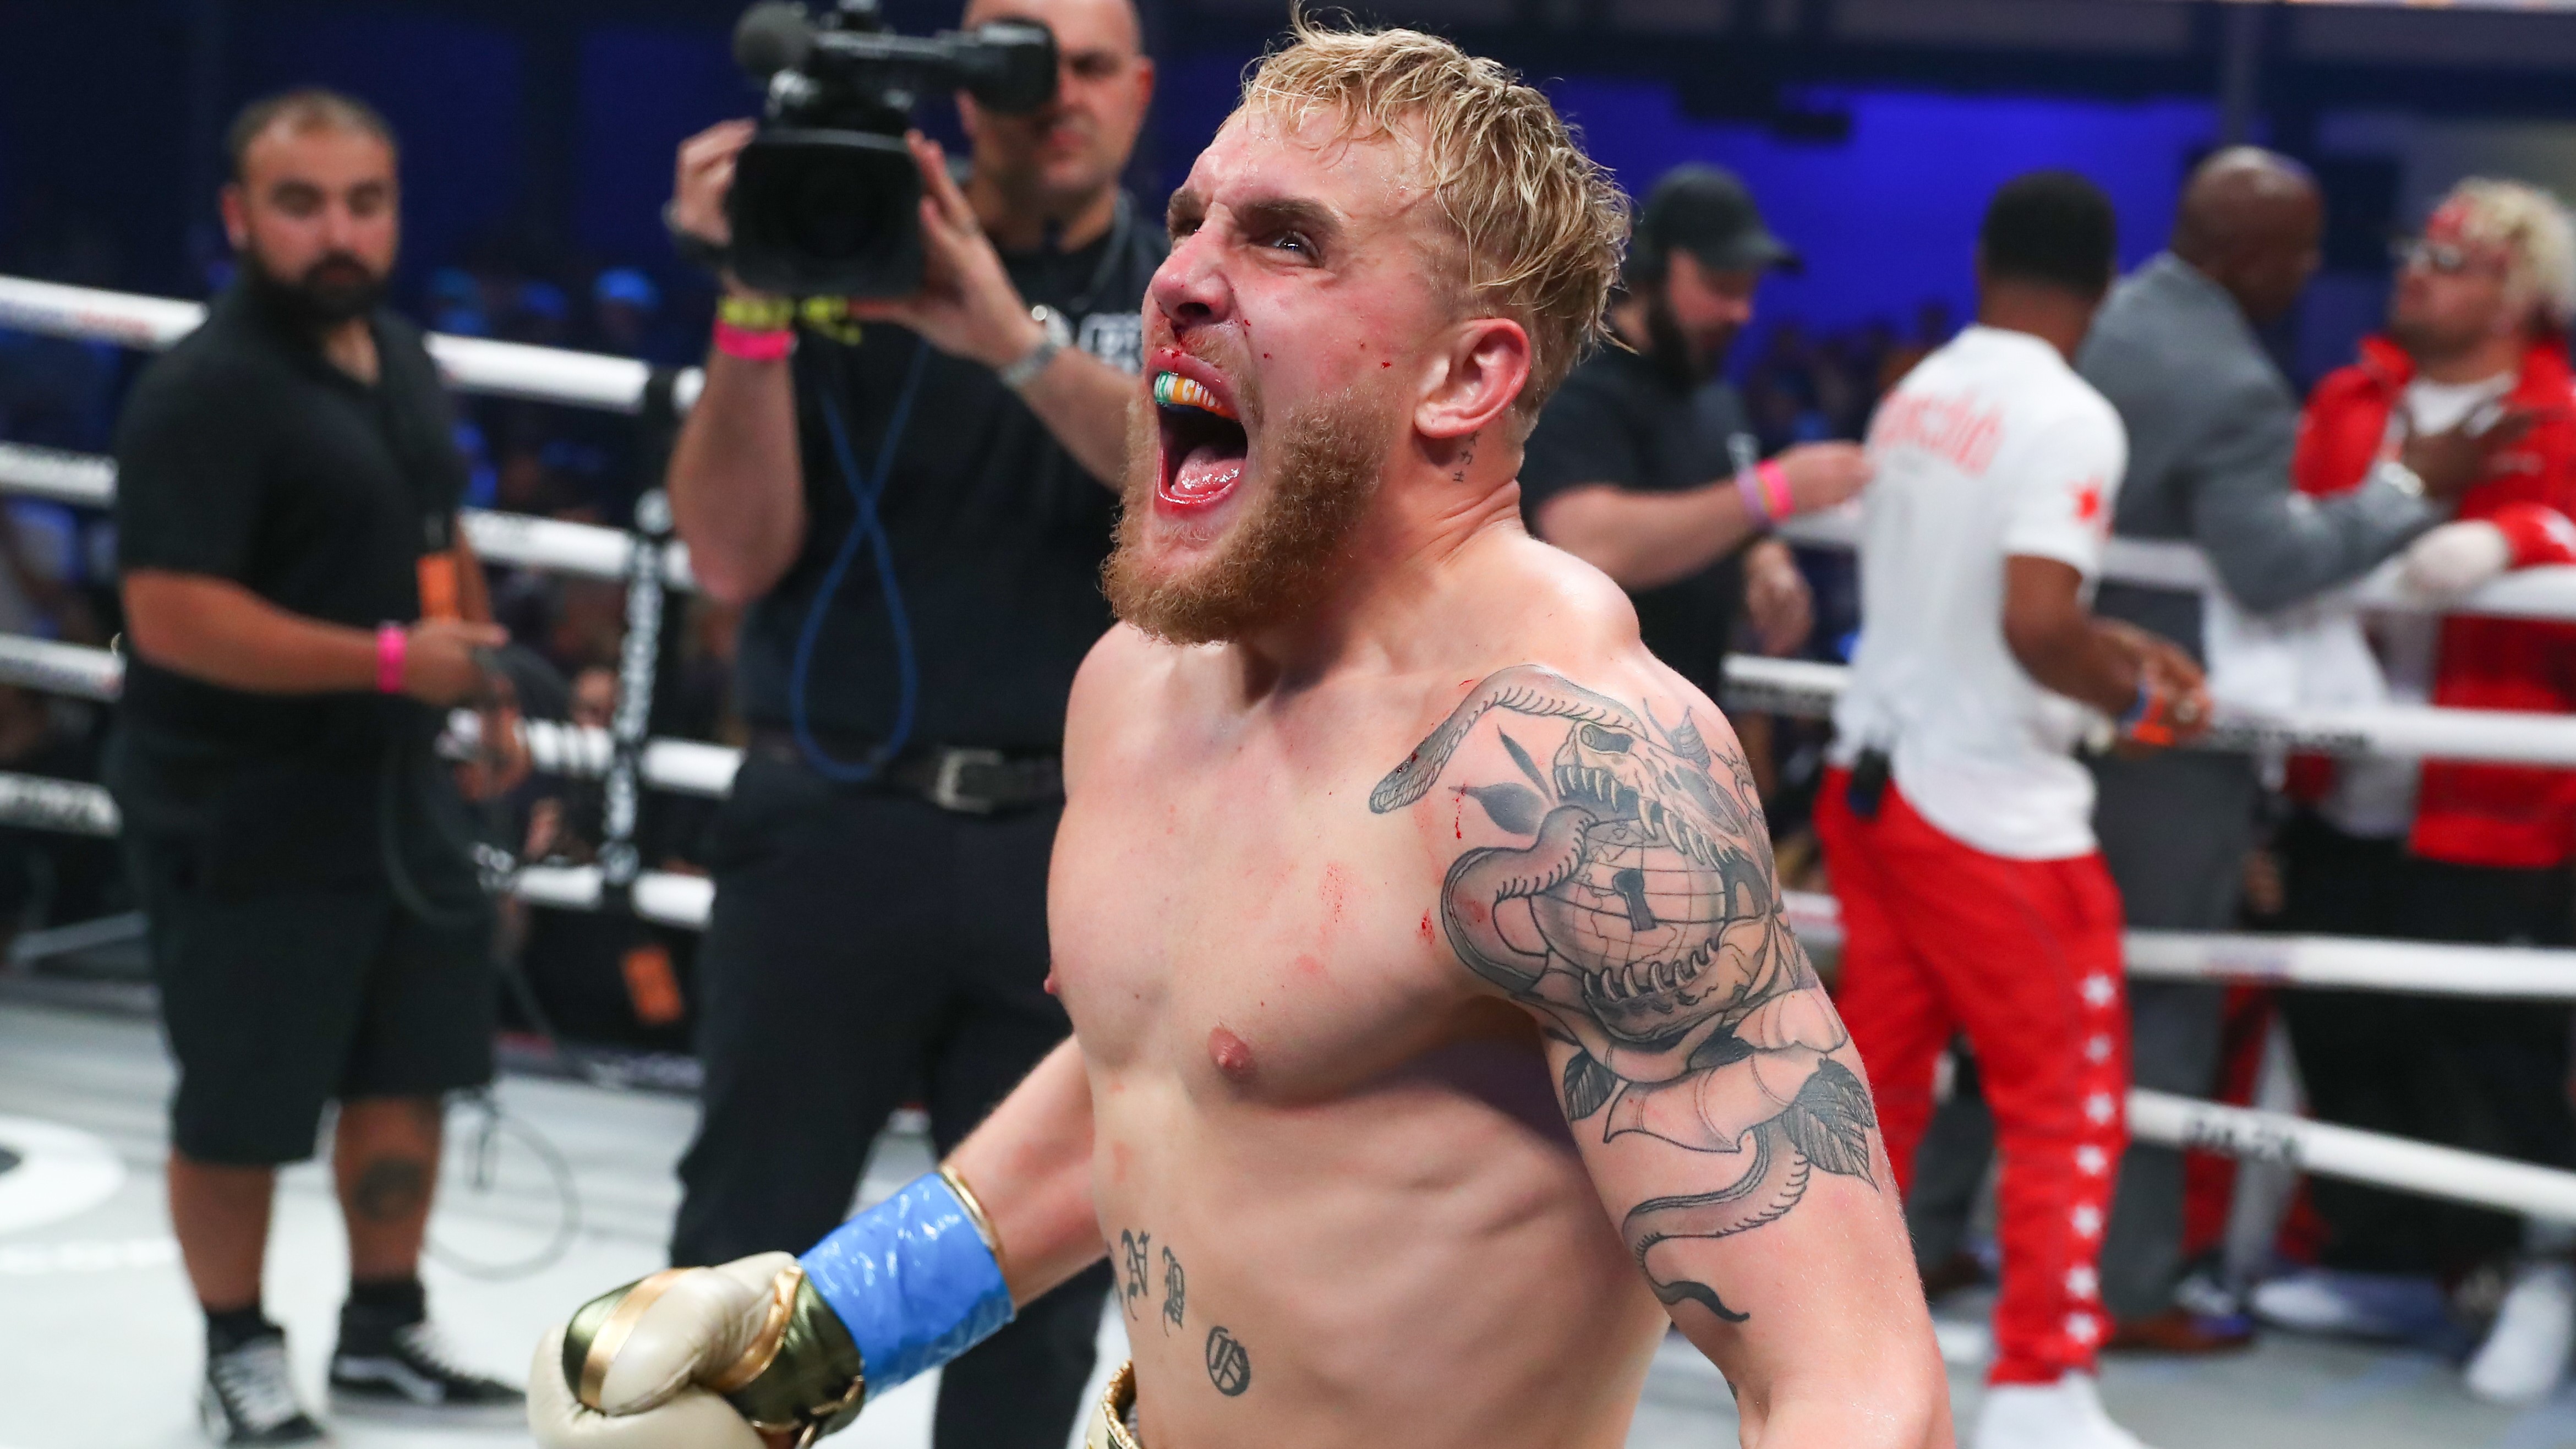 jake paul during a past boxing event